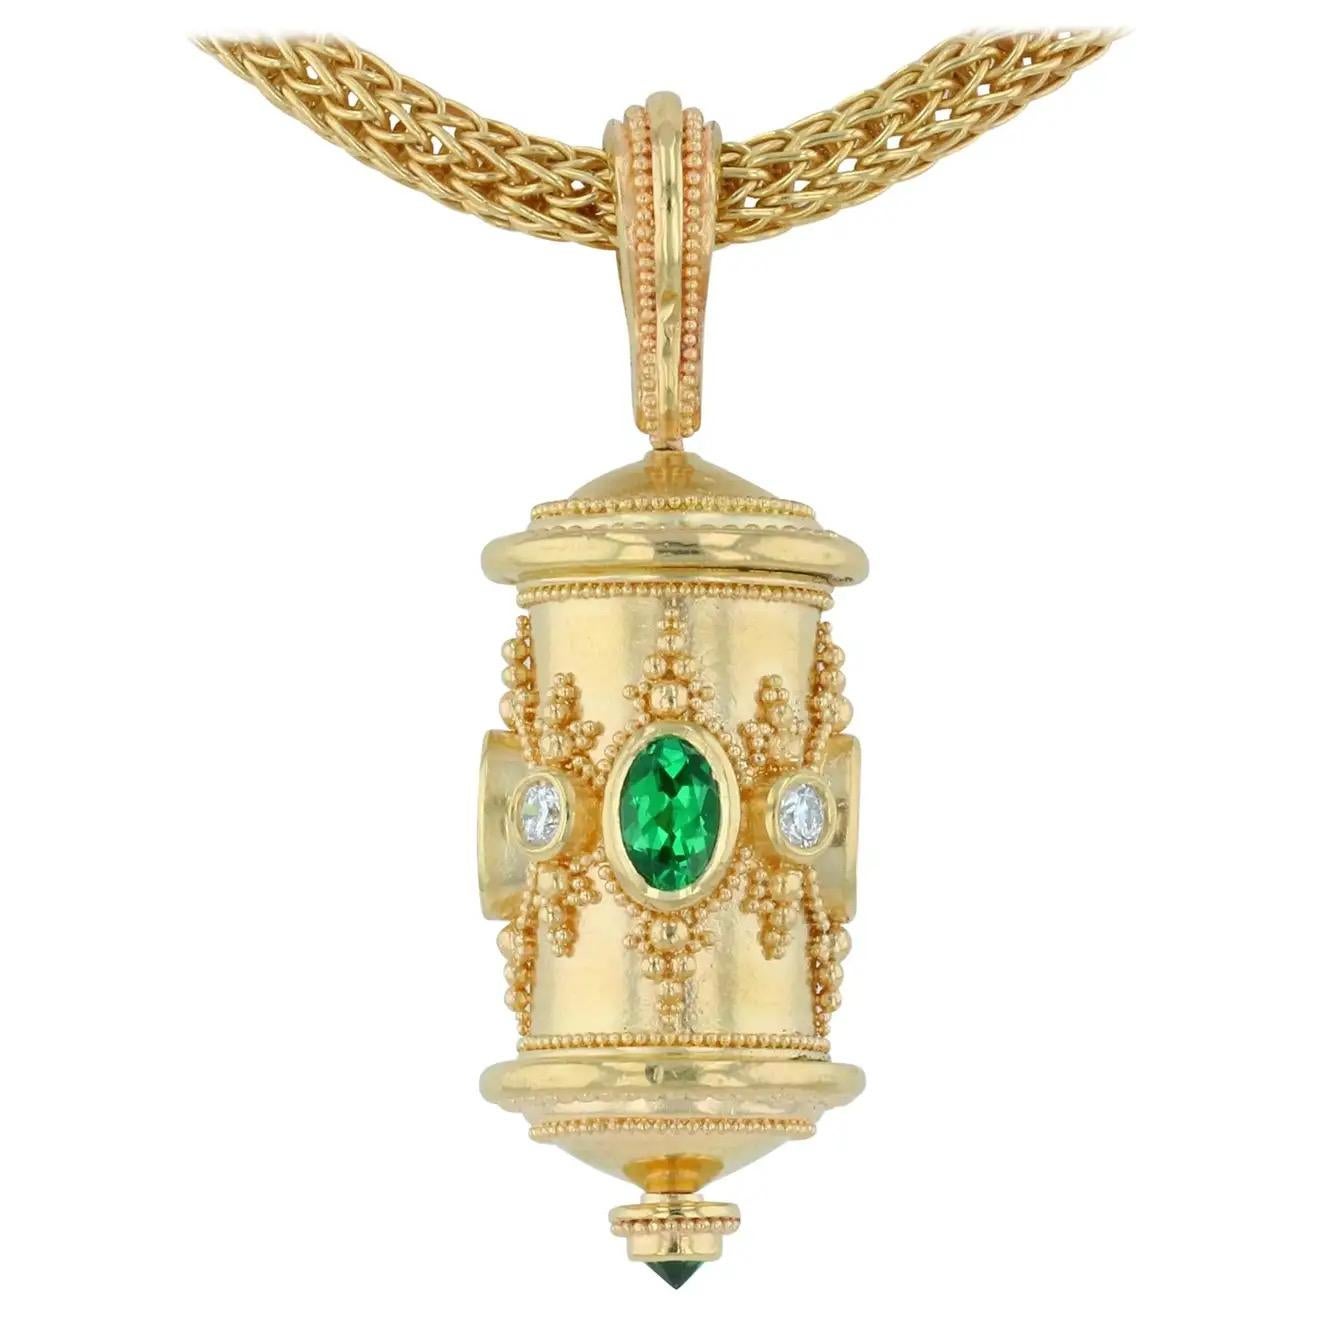 Made entirely by the hand of Kent Raible, his hand fabricated 'Prayer Wheel' pendant is simply stunning! 
Based on the design of the Tibetan Prayer Wheels, this personal Prayer Wheel spins on a central axis, sending your prayers out into the world